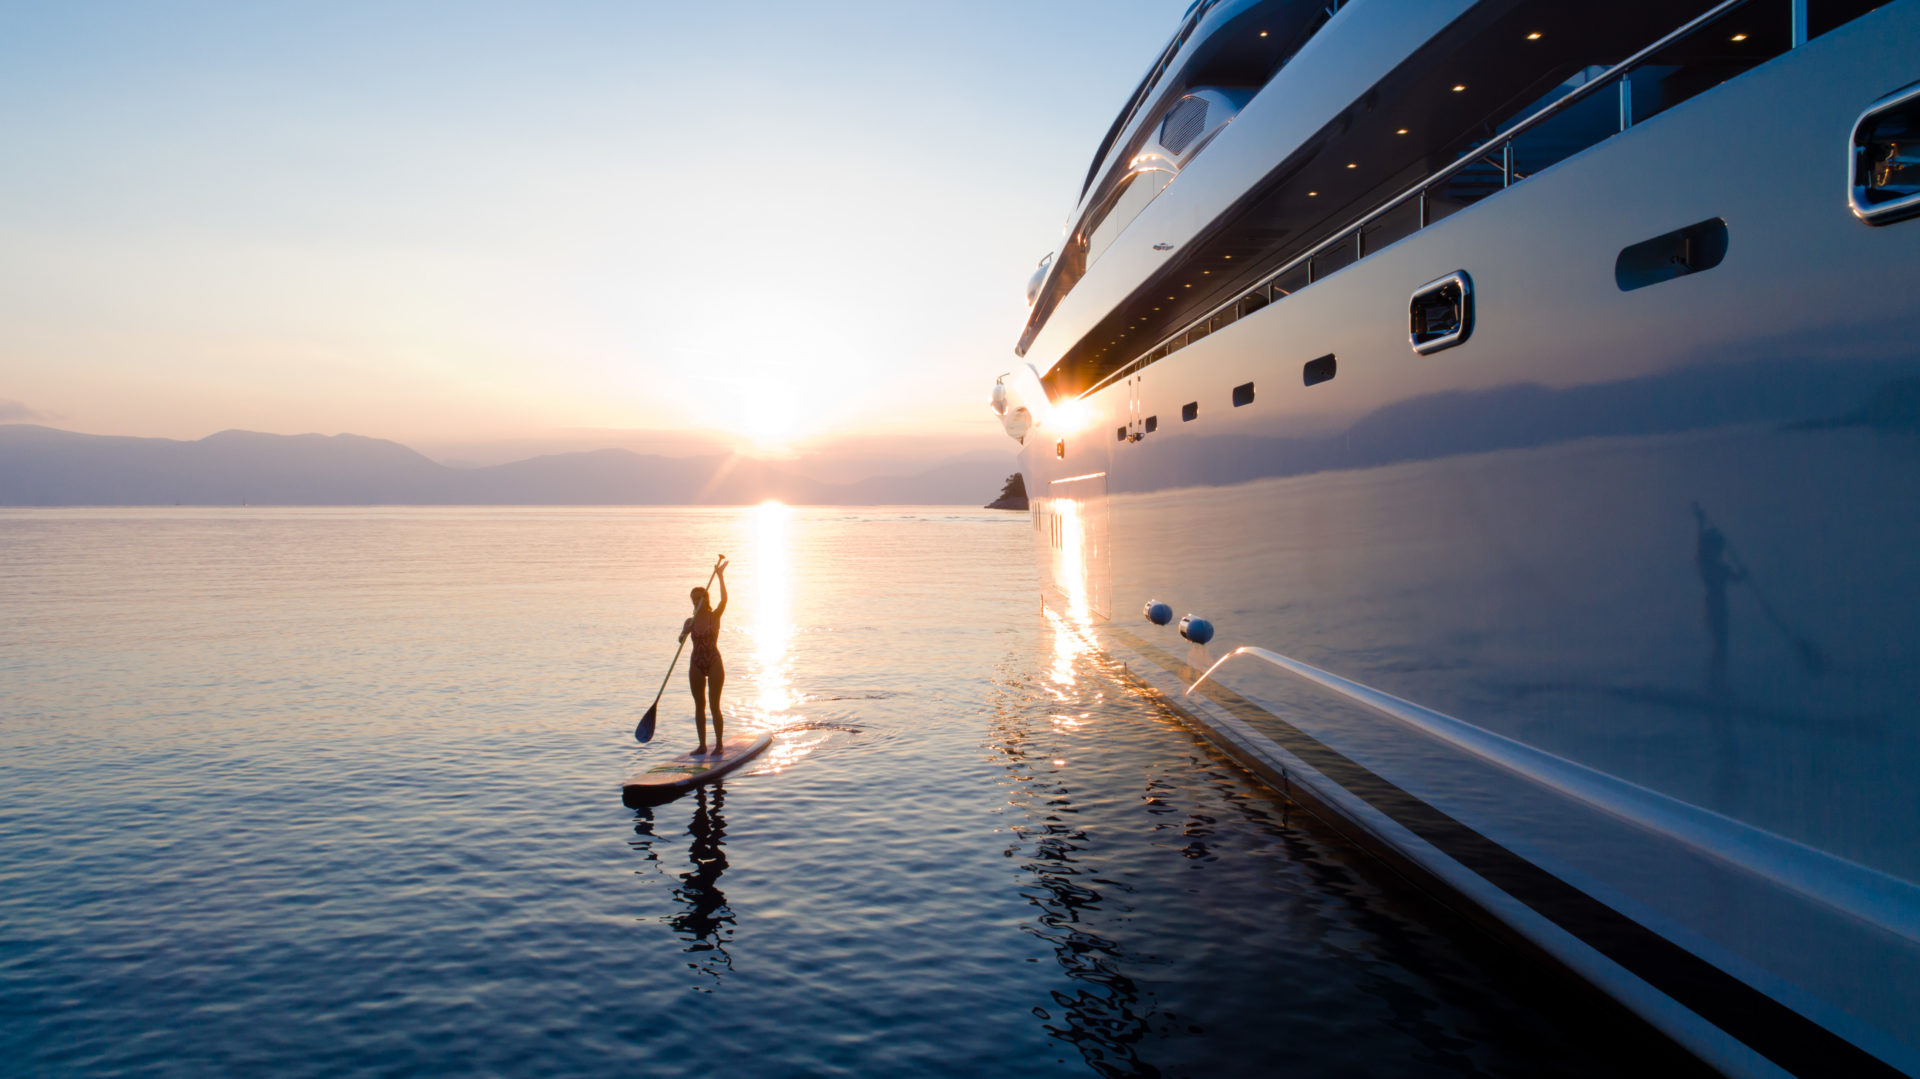 Yacht and woman on paddle board